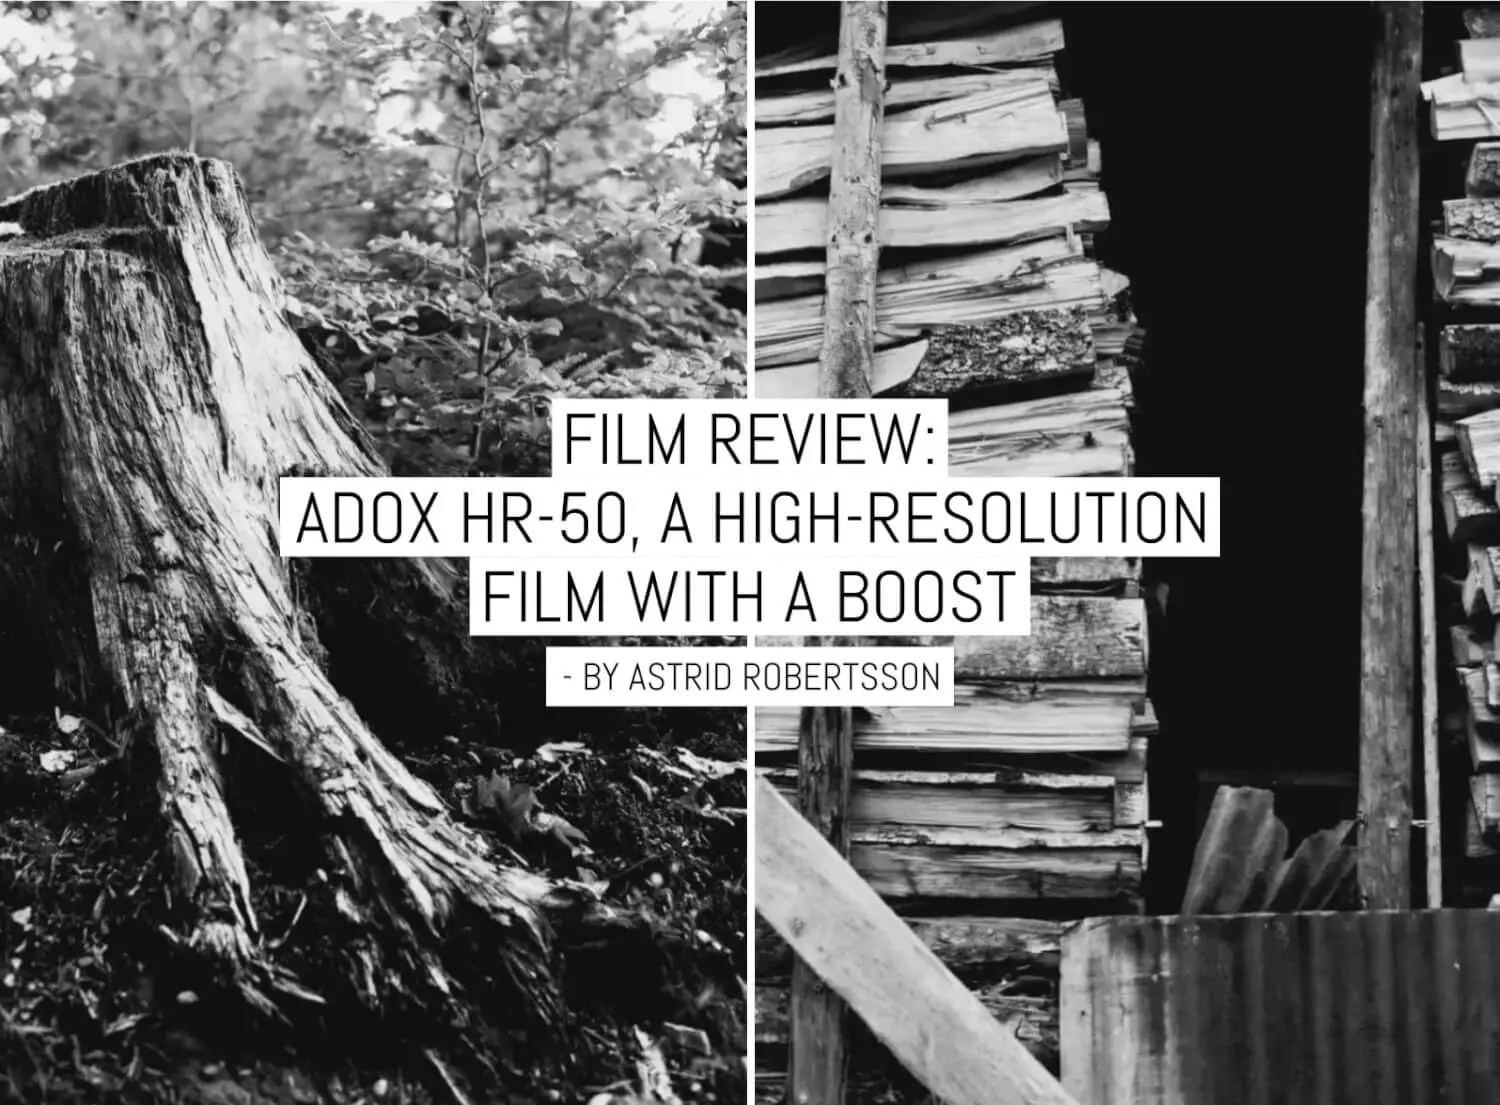 Film review: ADOX HR-50, a high-resolution film with a boost